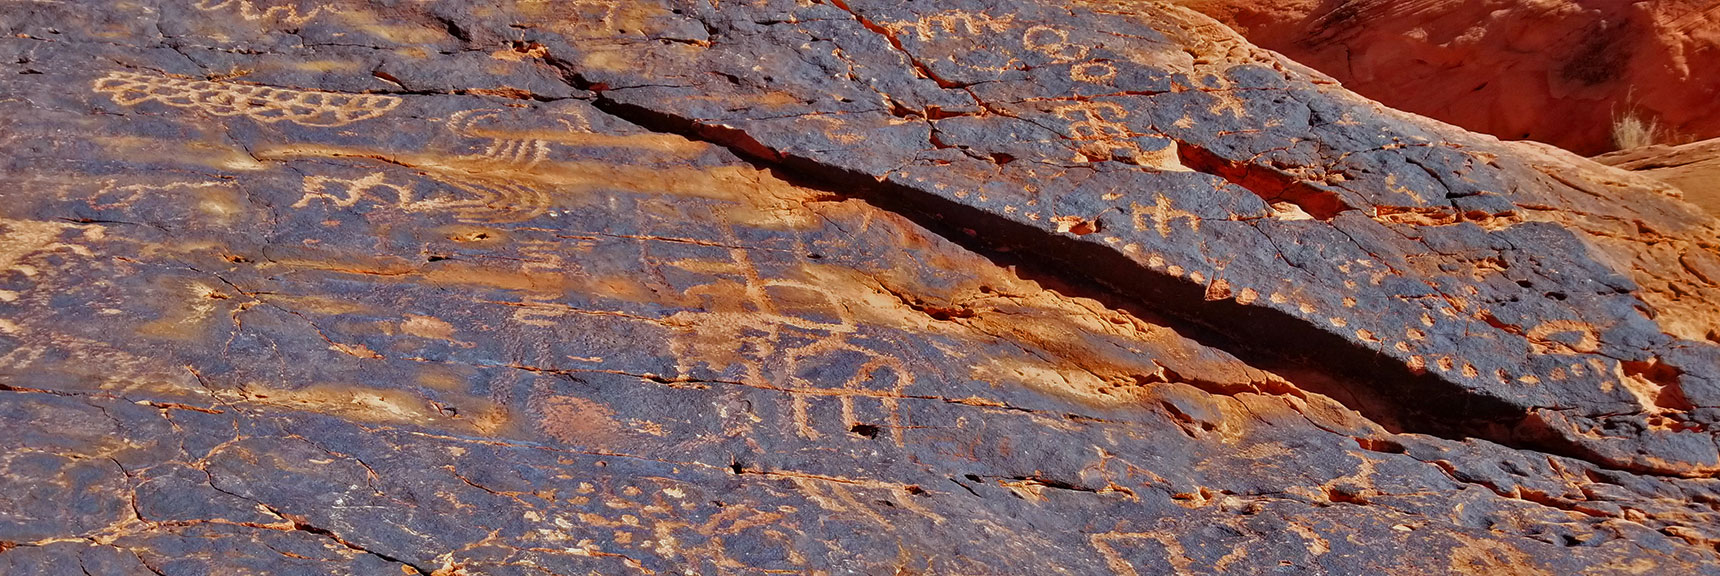 Petroglyphs on Mouse's Tank Trail in Valley of Fire State Park, Nevada, Slide 6